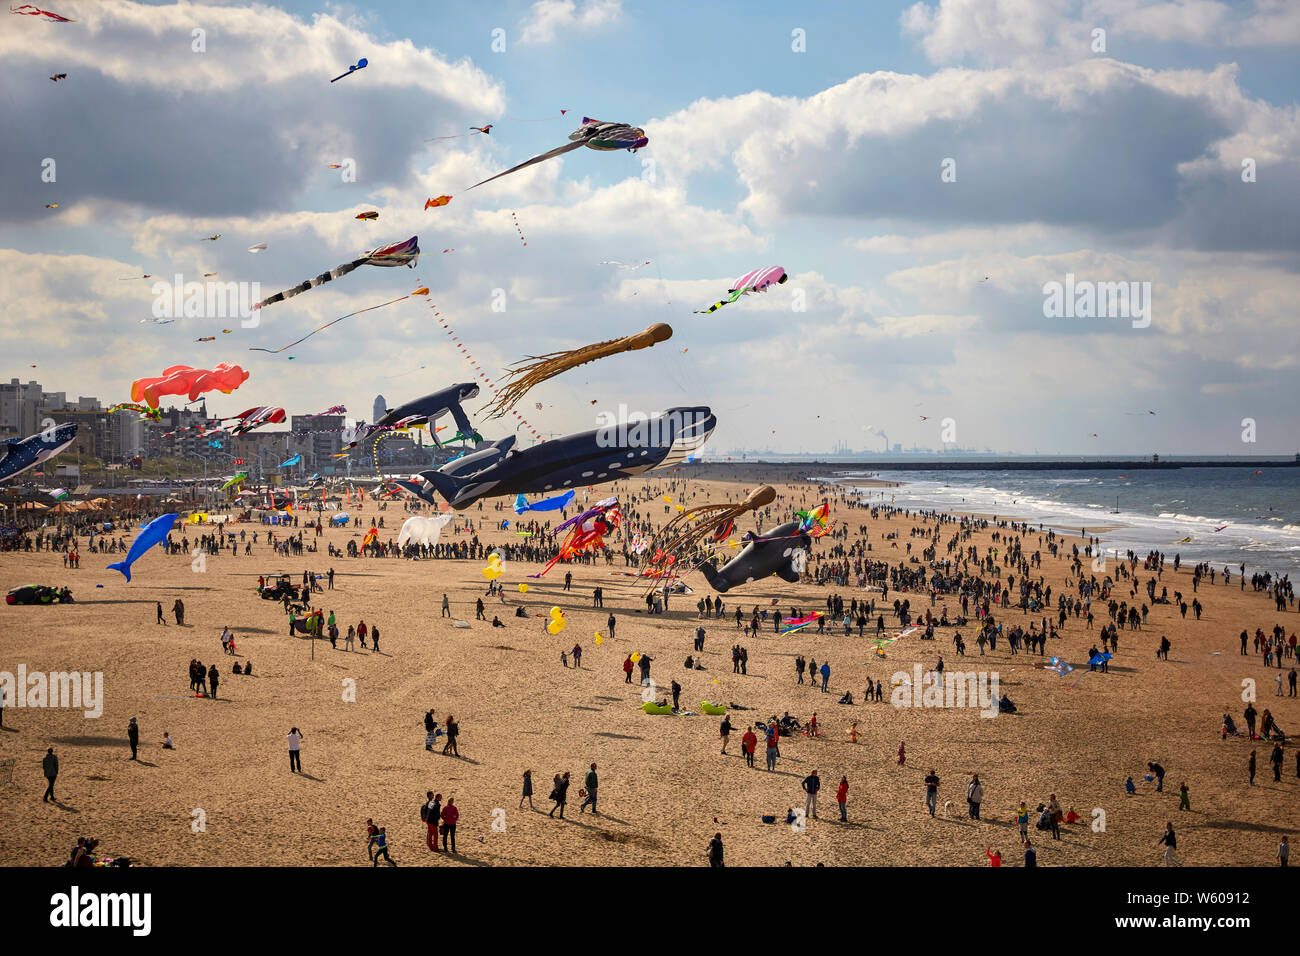 View of the giant kites floating on Scheveningen beach during the kite festival in The Hague. Stock Photo